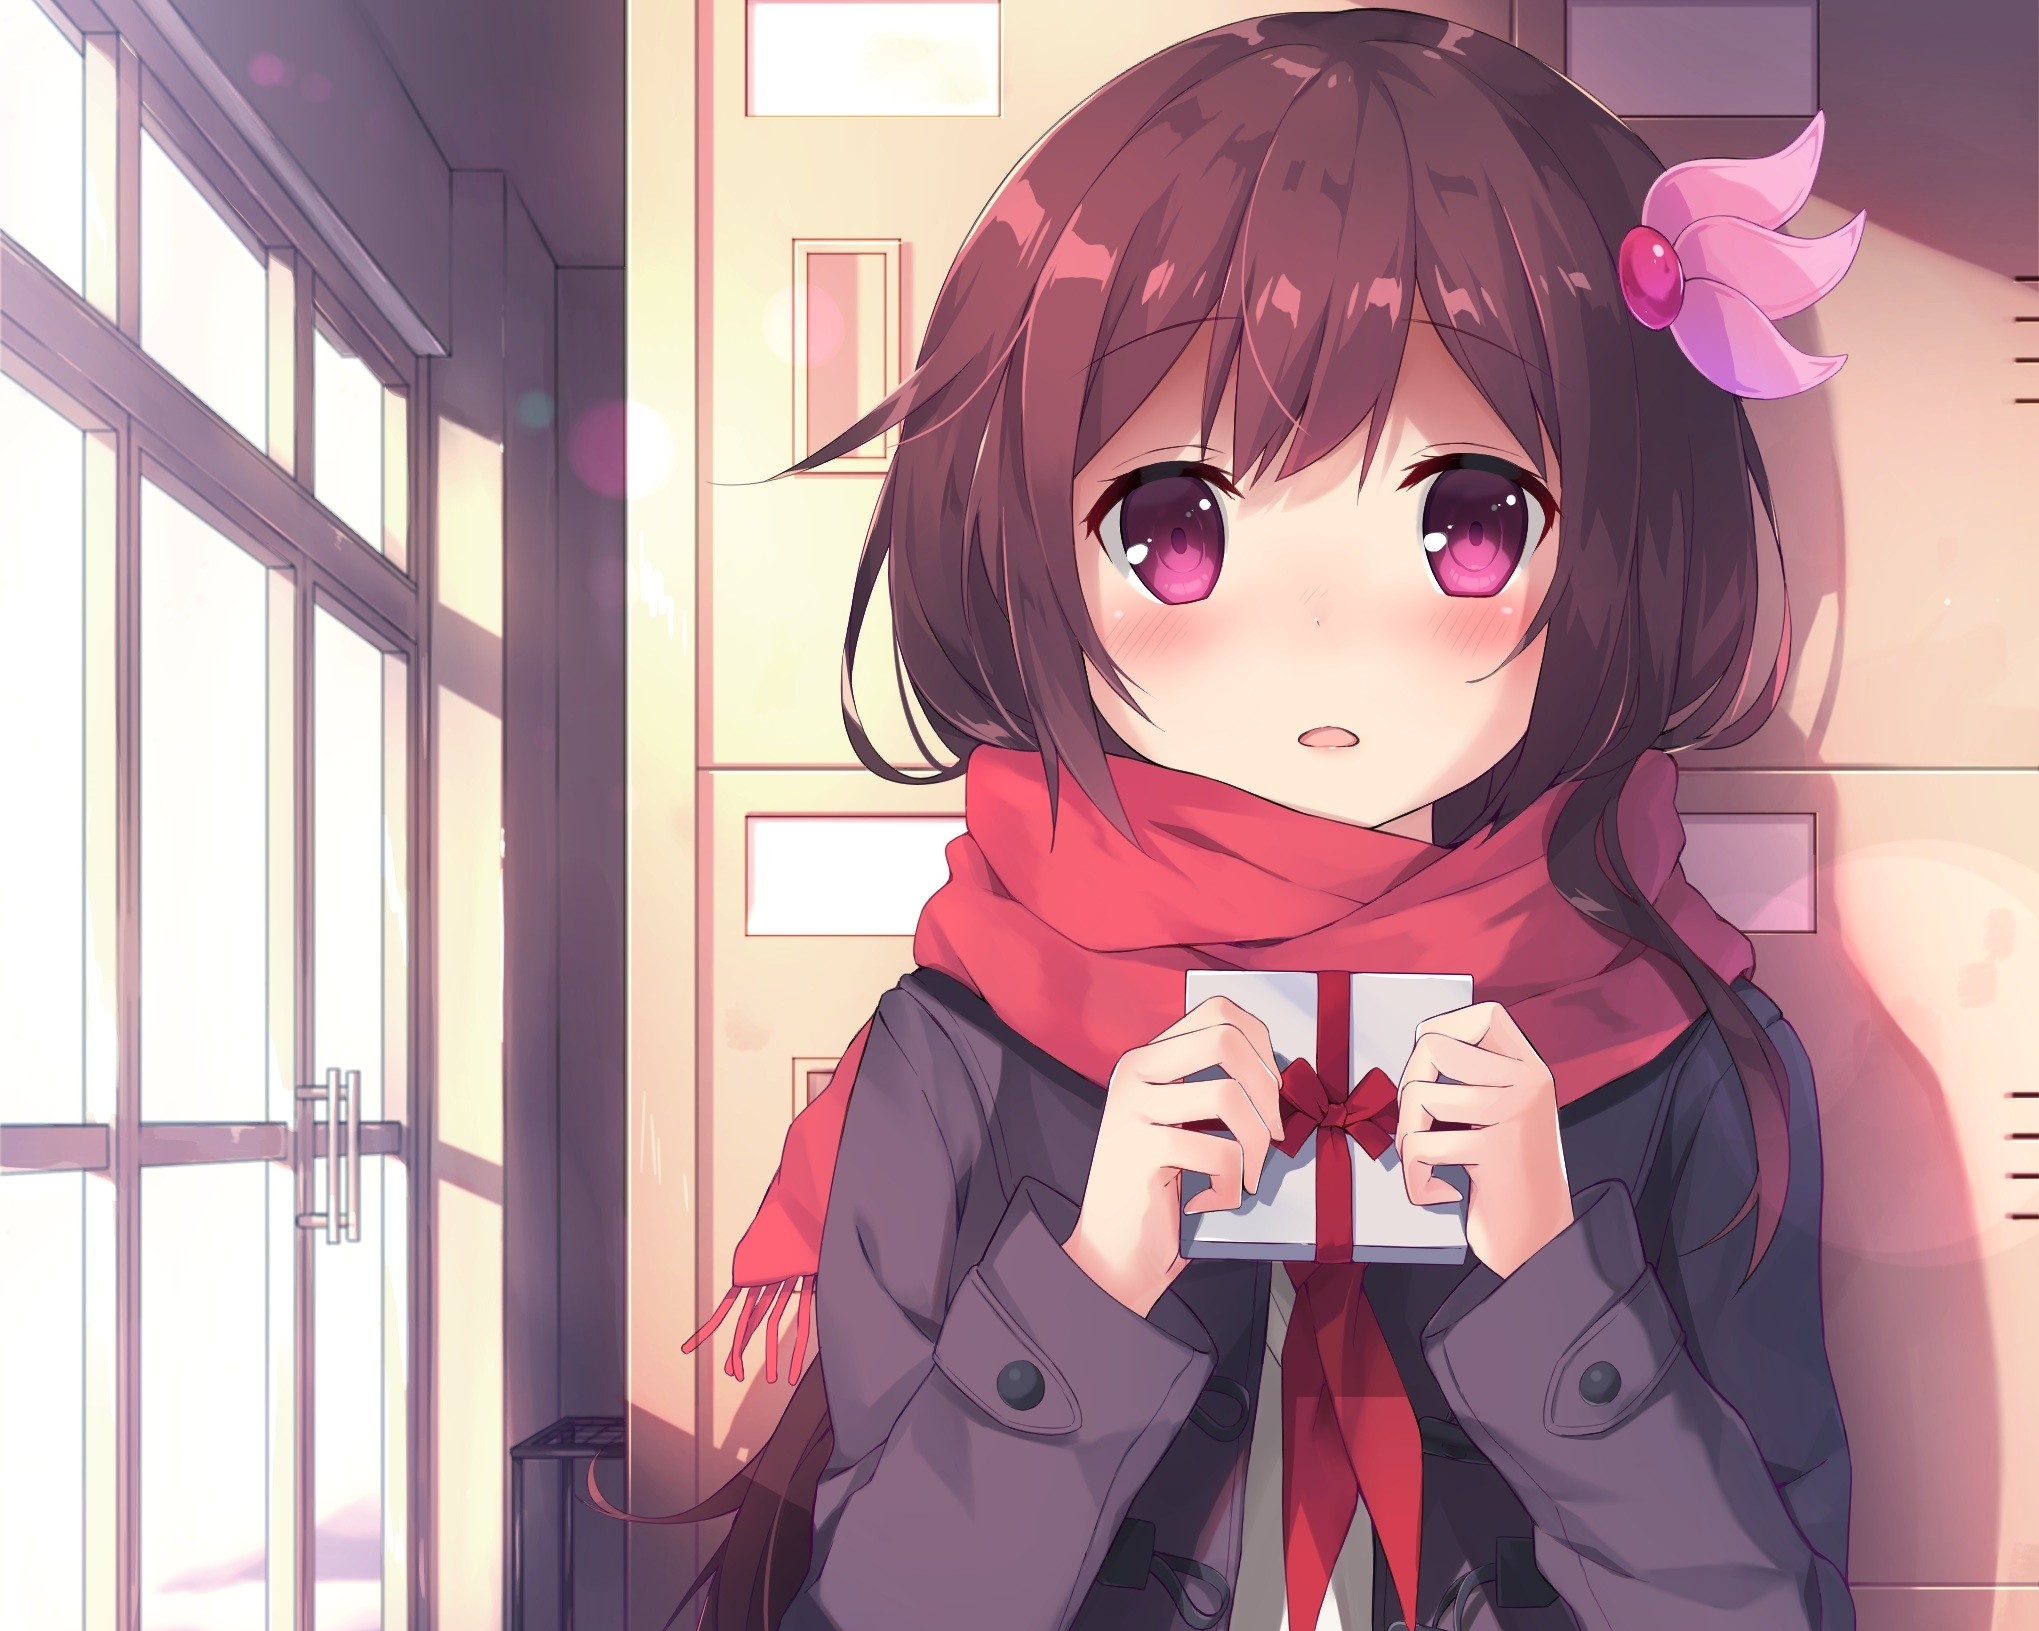 Anime girl, valentines day 2017, shy expression, red scarf # original